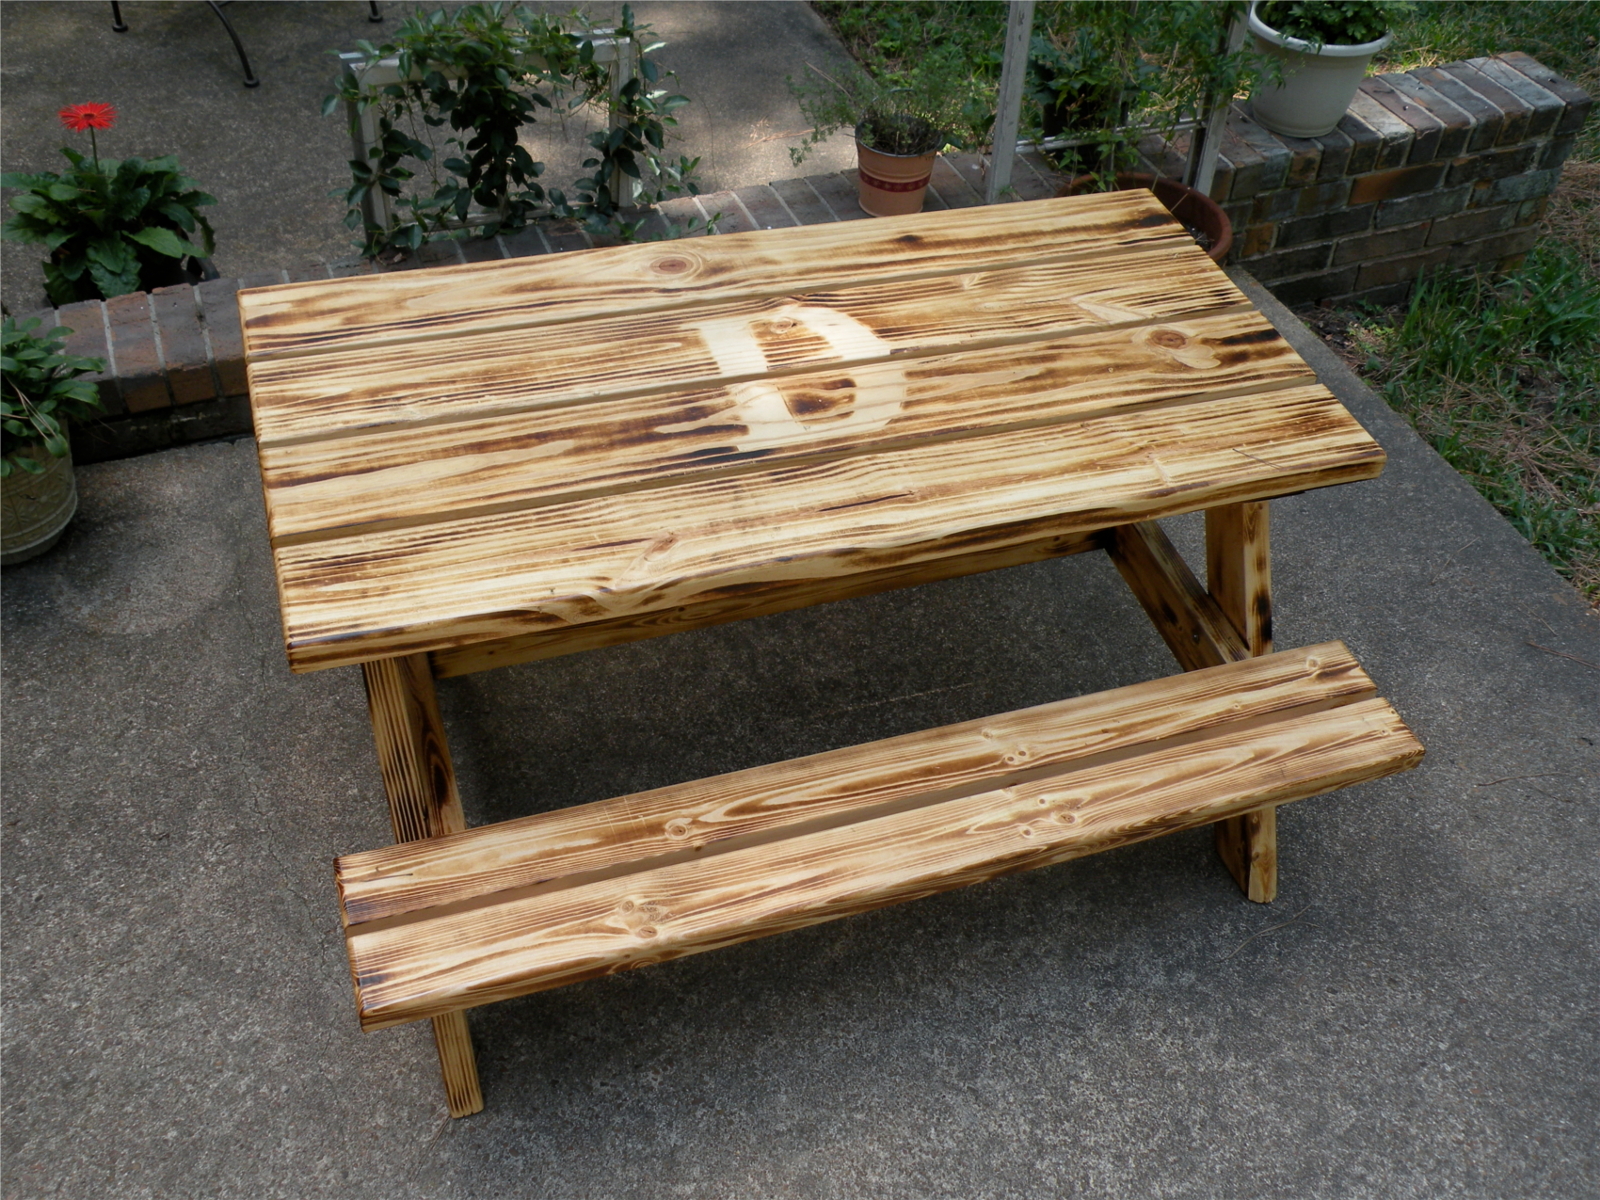 Child Picnic Table | Do It Yourself Home Projects from Ana White